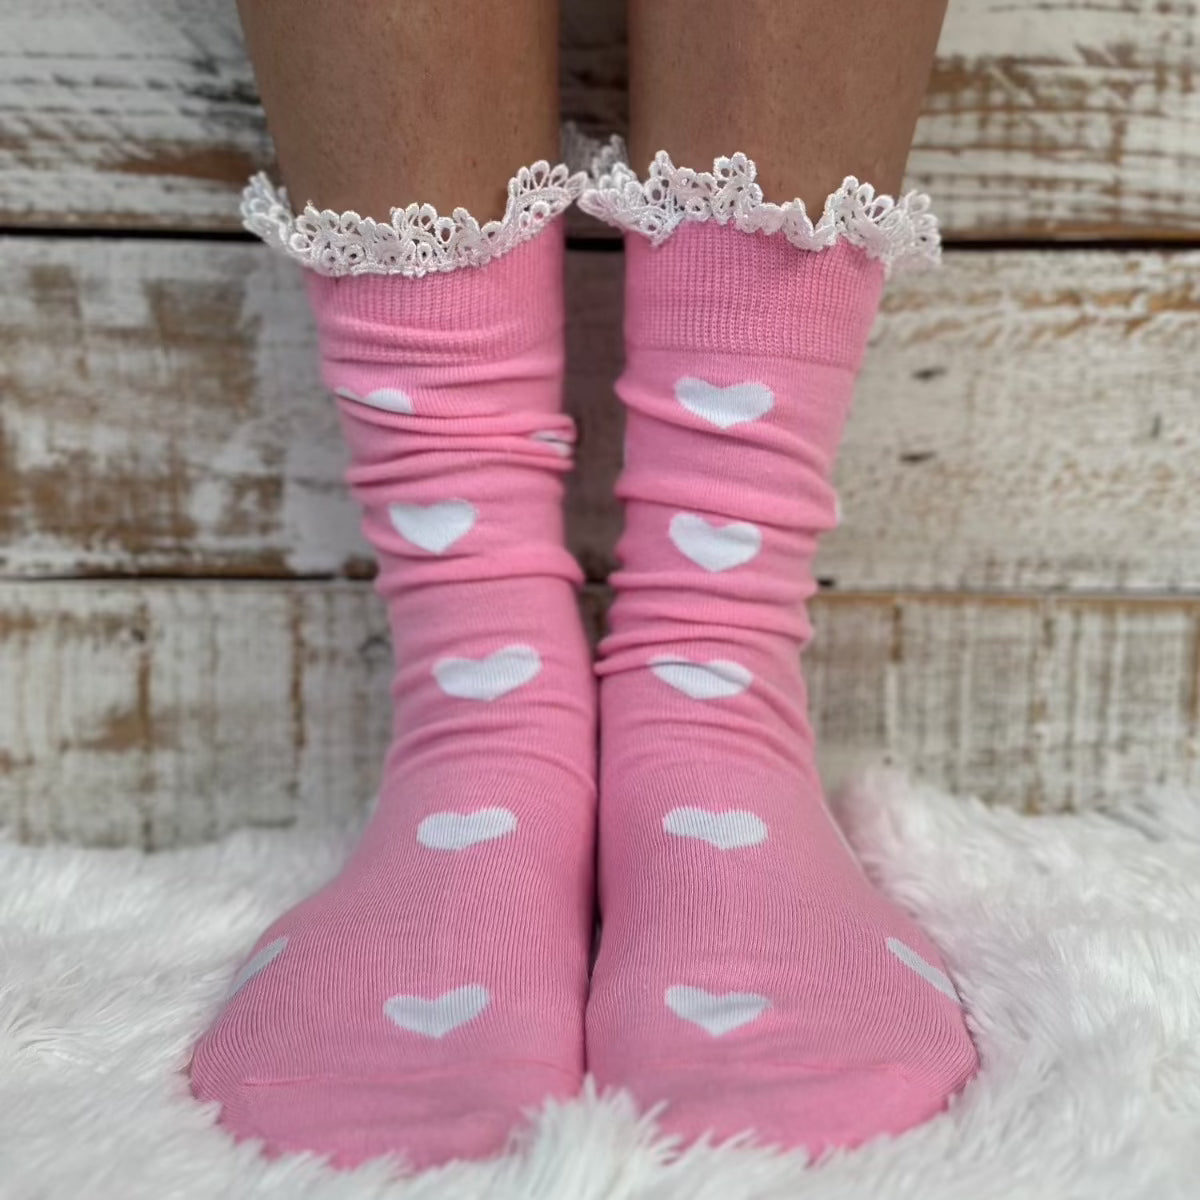 HEARTS DELIGHT lace top heart ankle sock - pink, Catherine Cole , Valentine's day socks women's, Heart lace socks women, cute Valentine socks ladies.